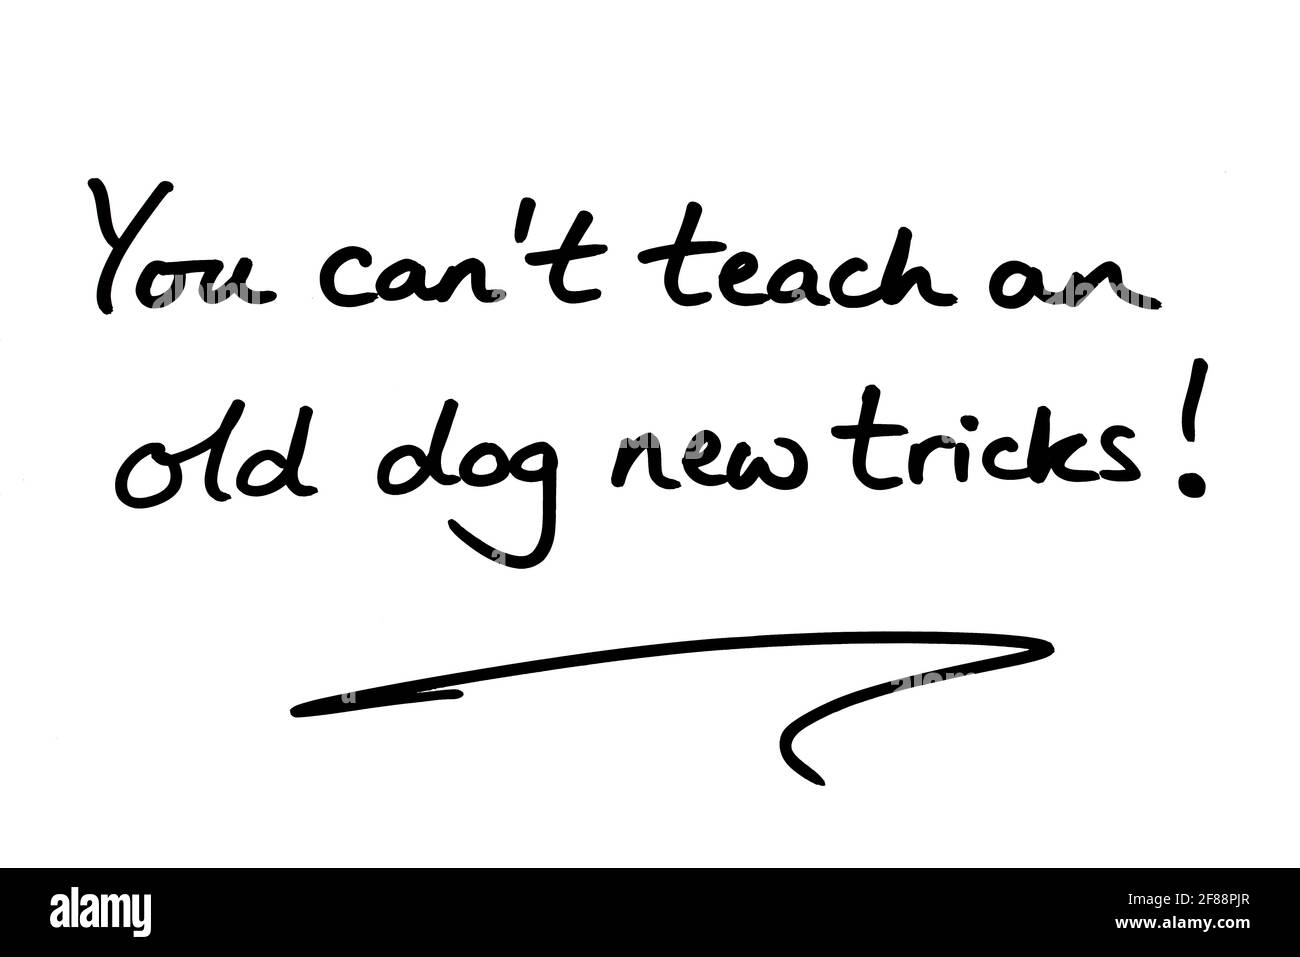 You cant teach an old dog new tricks! handwritten on a white background. Stock Photo